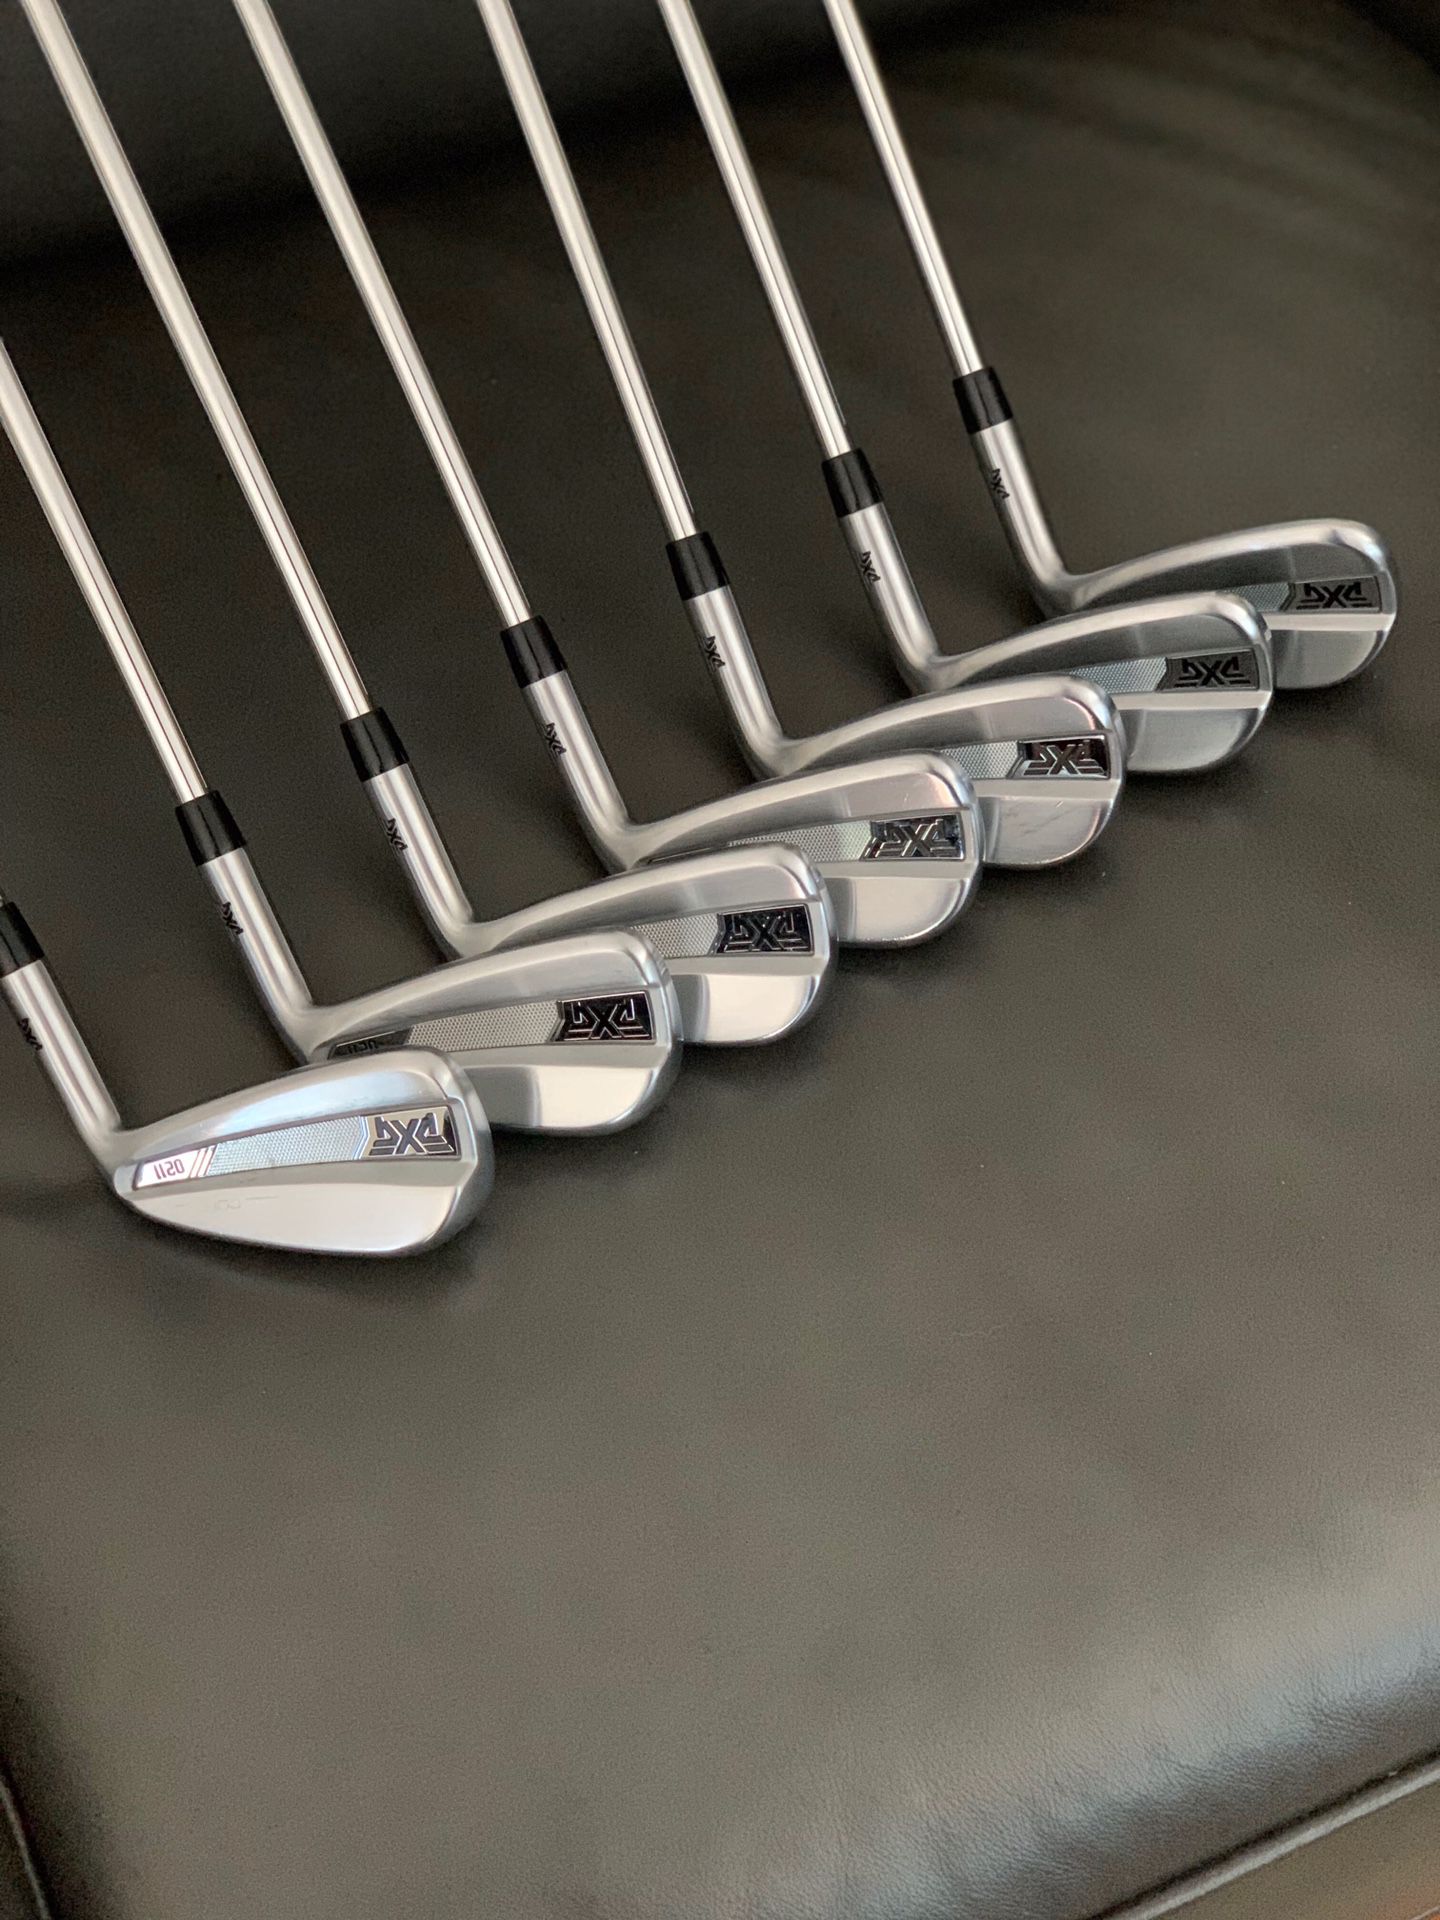 PXG 2019 0211 Irons in Perfect Condition